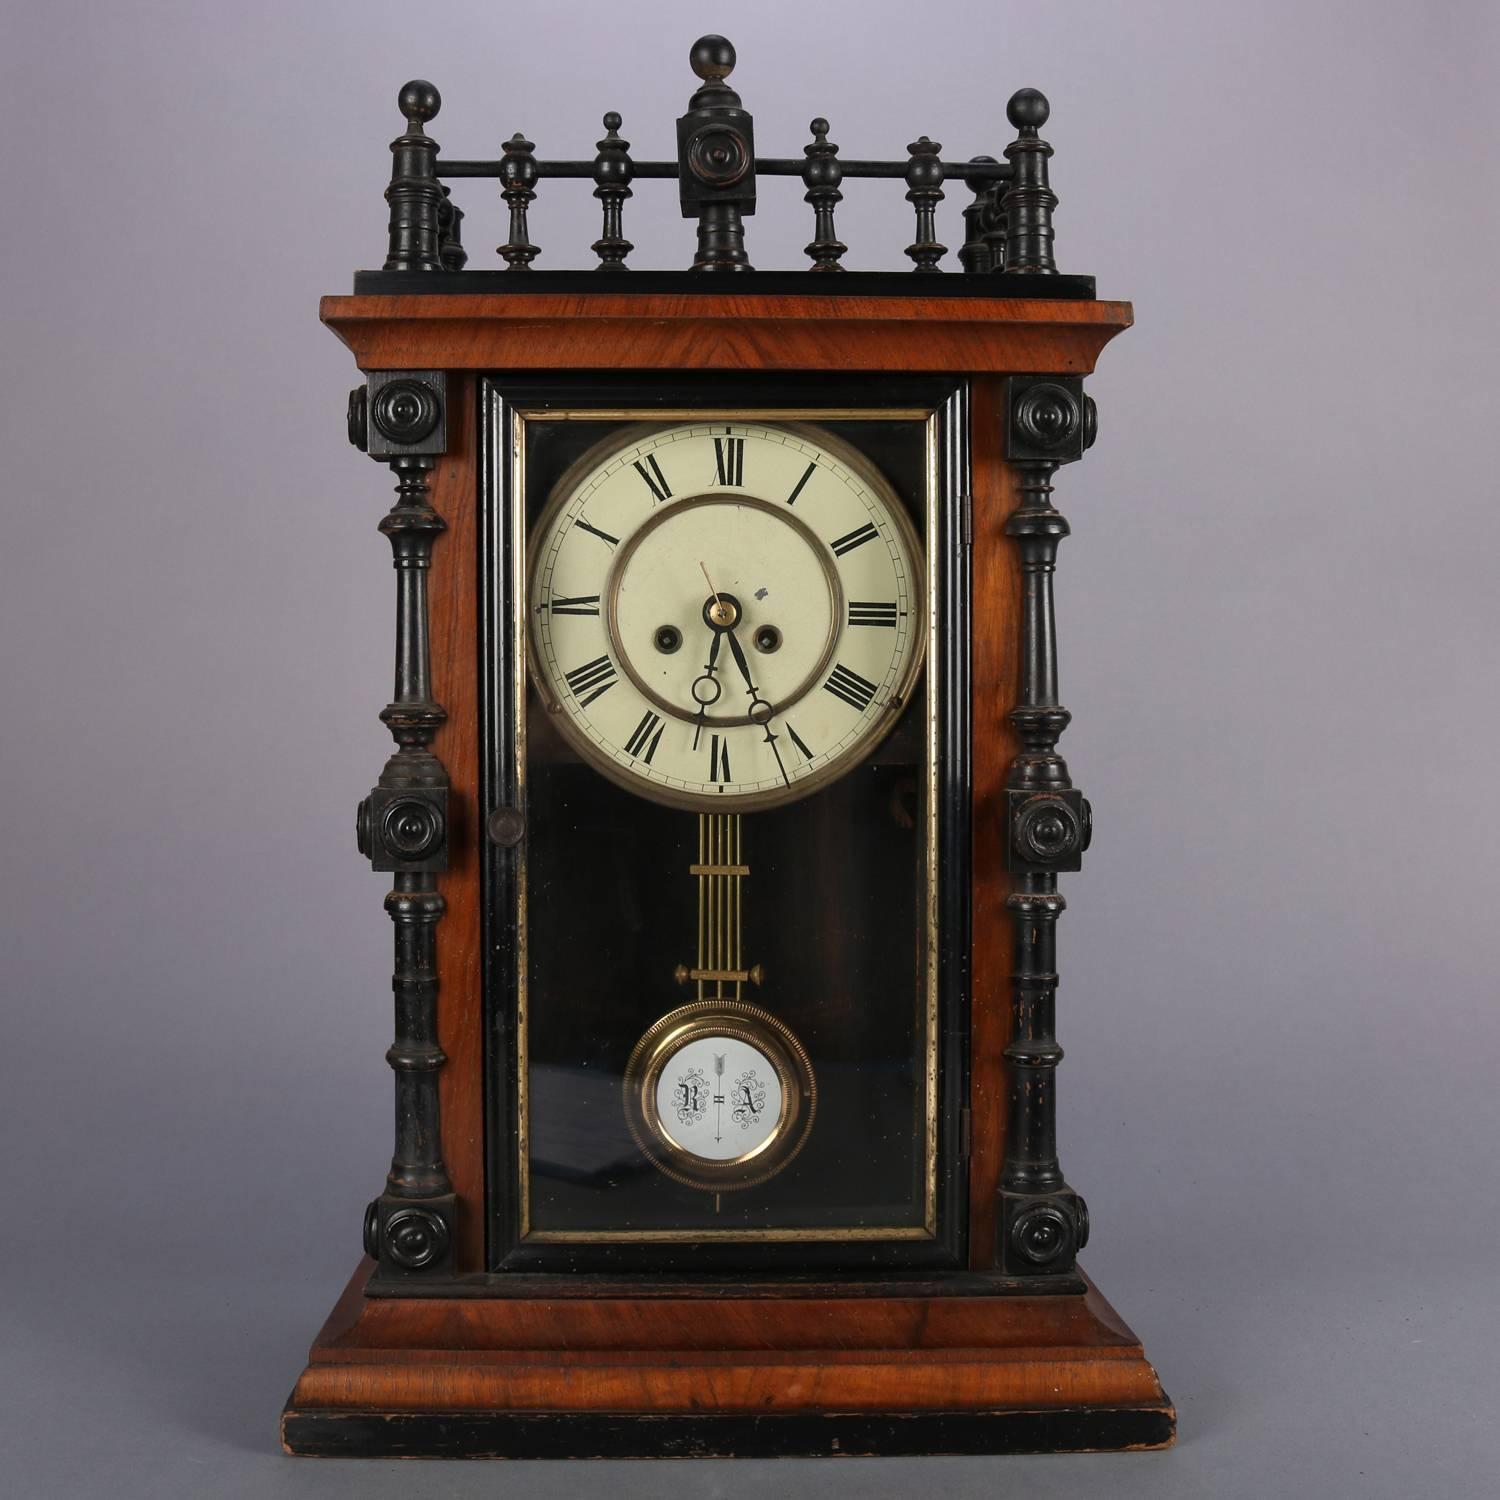 German Aesthetic Movement carved walnut clock features ebonized gallery and flanking corner columns, door frame with ebonized and gilt border, enameled face with Roman numerals, works are numbered but unmarked, elements of Black Forrest, clock works